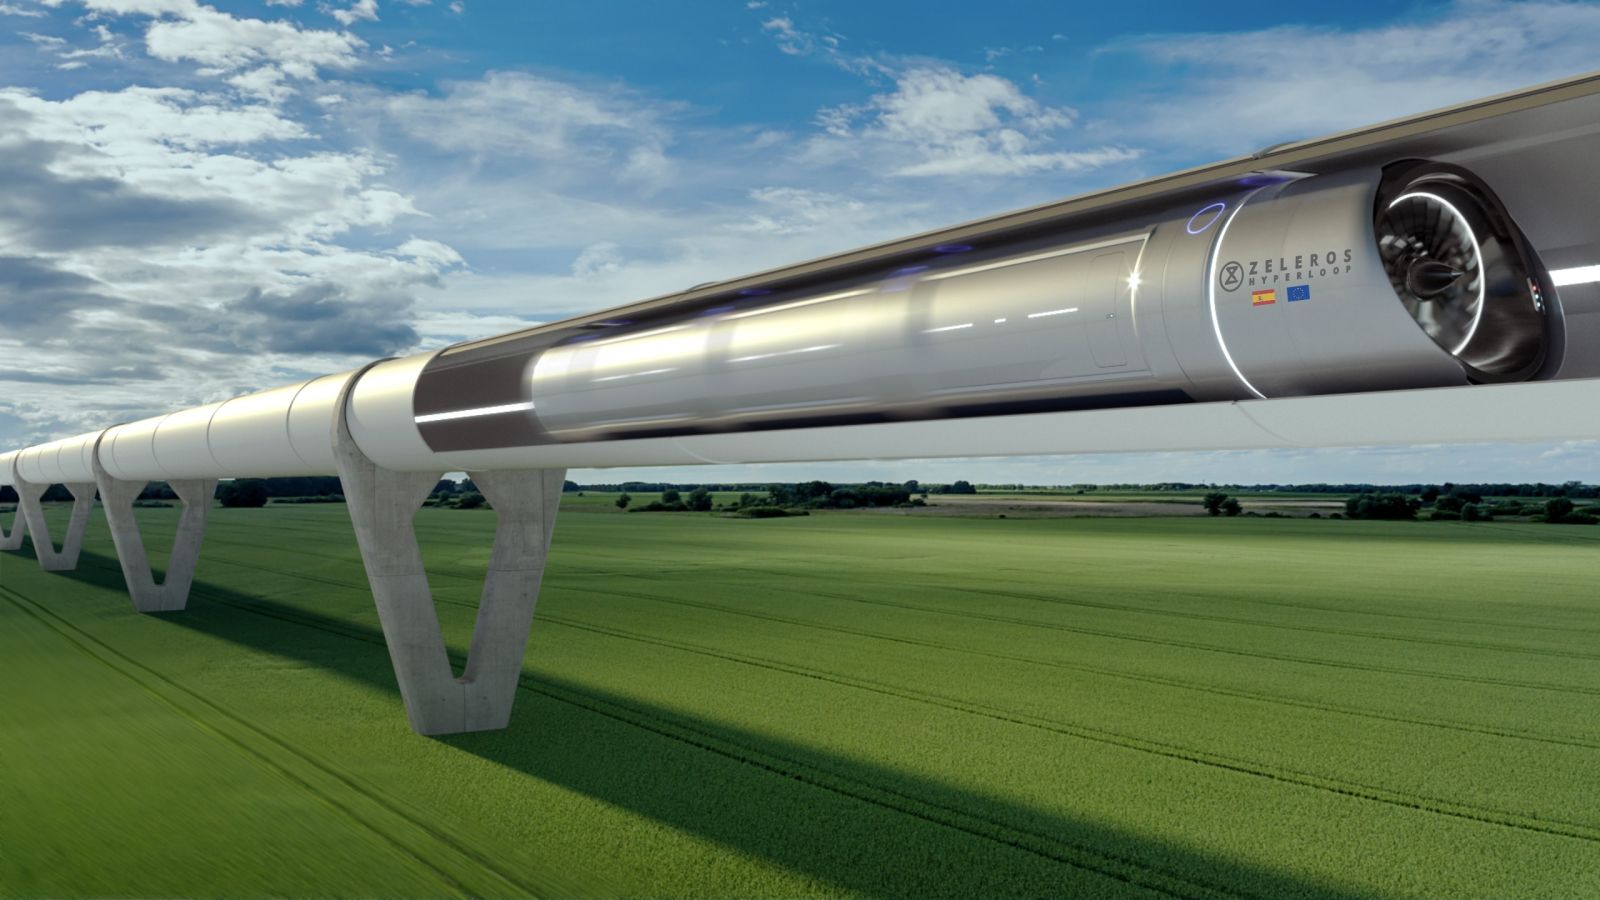 Illustration for article titled Spanish startup Zeleros raised further 7 million euros to build a Hyperloop test track(among other stuff)